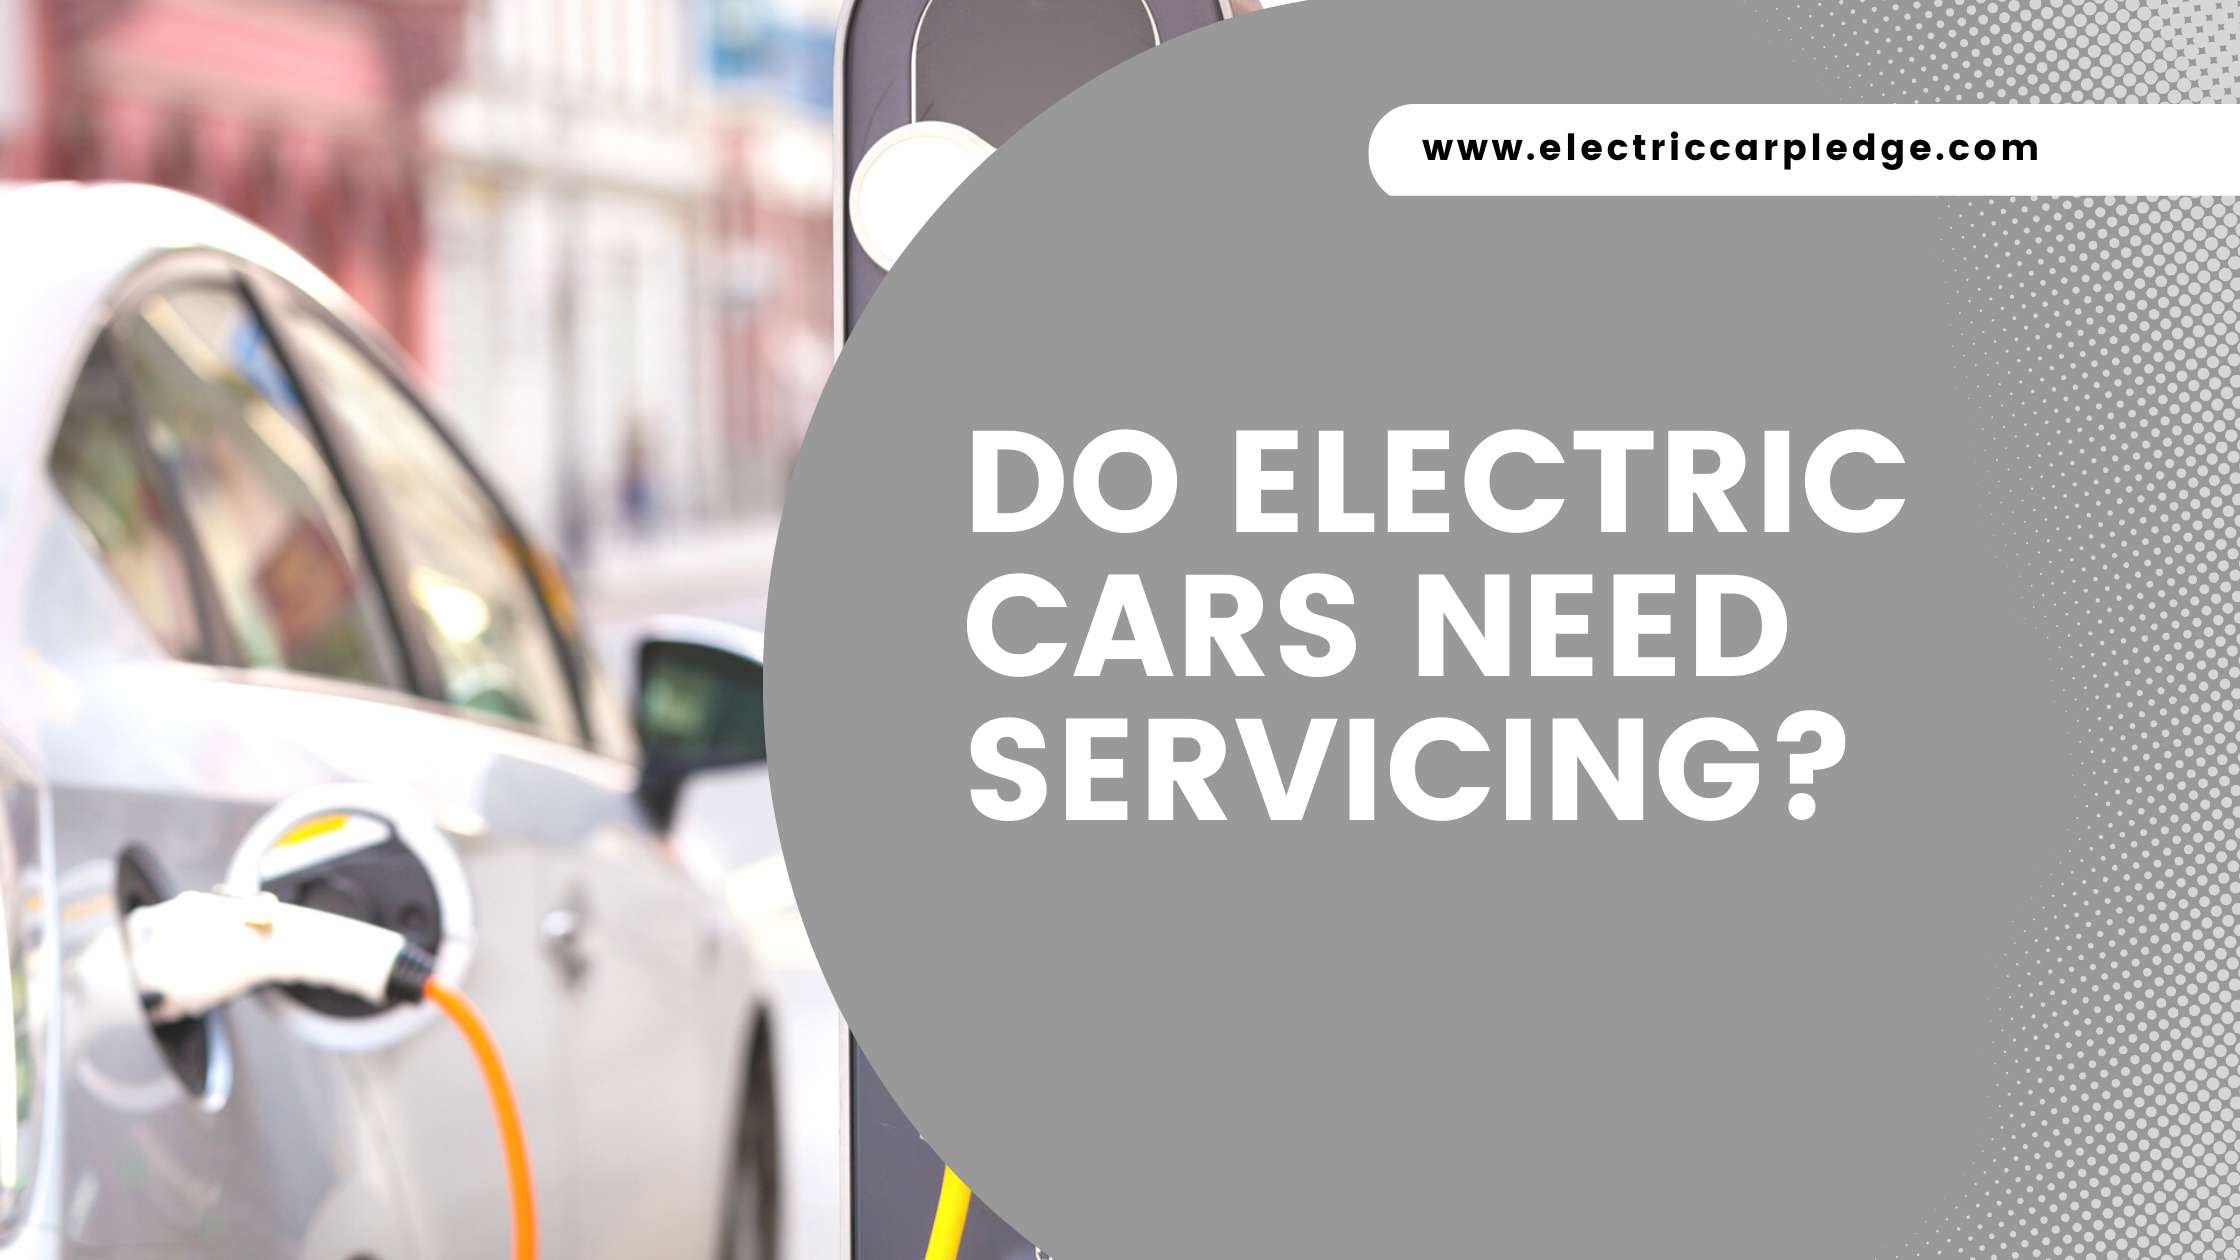 Do Electric Cars Need Servicing? Here’s What You Need to Know